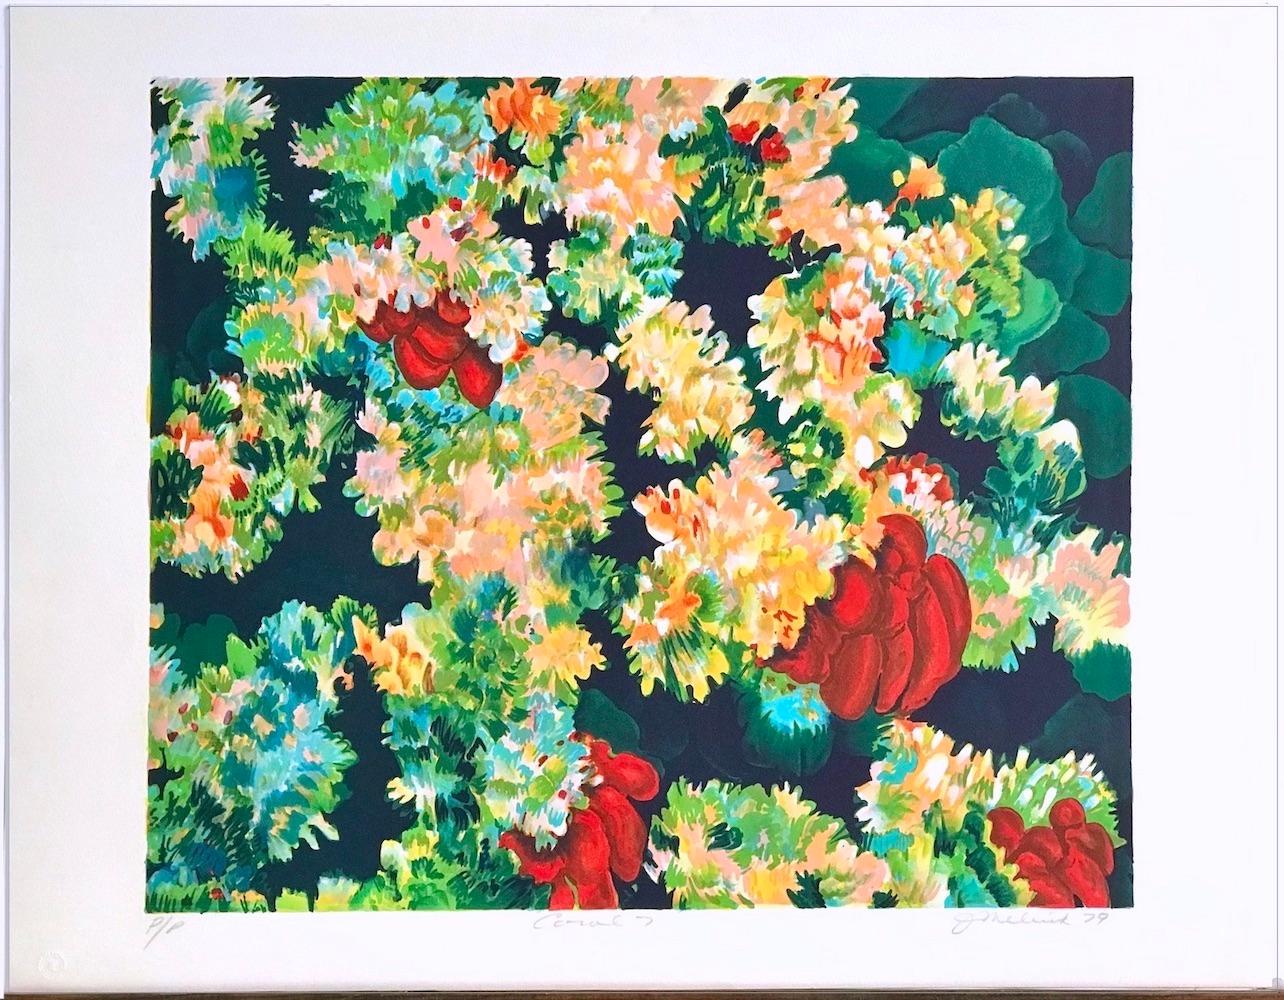 Coral 7 is an original hand drawn lithograph by the NY woman artist, Joan Melnick. Inspired by the fragile beauty of ocean reefs with their exotic aquatic animal forms and vibrant colors, Coral 7 is an abstract composition comprised of shades of